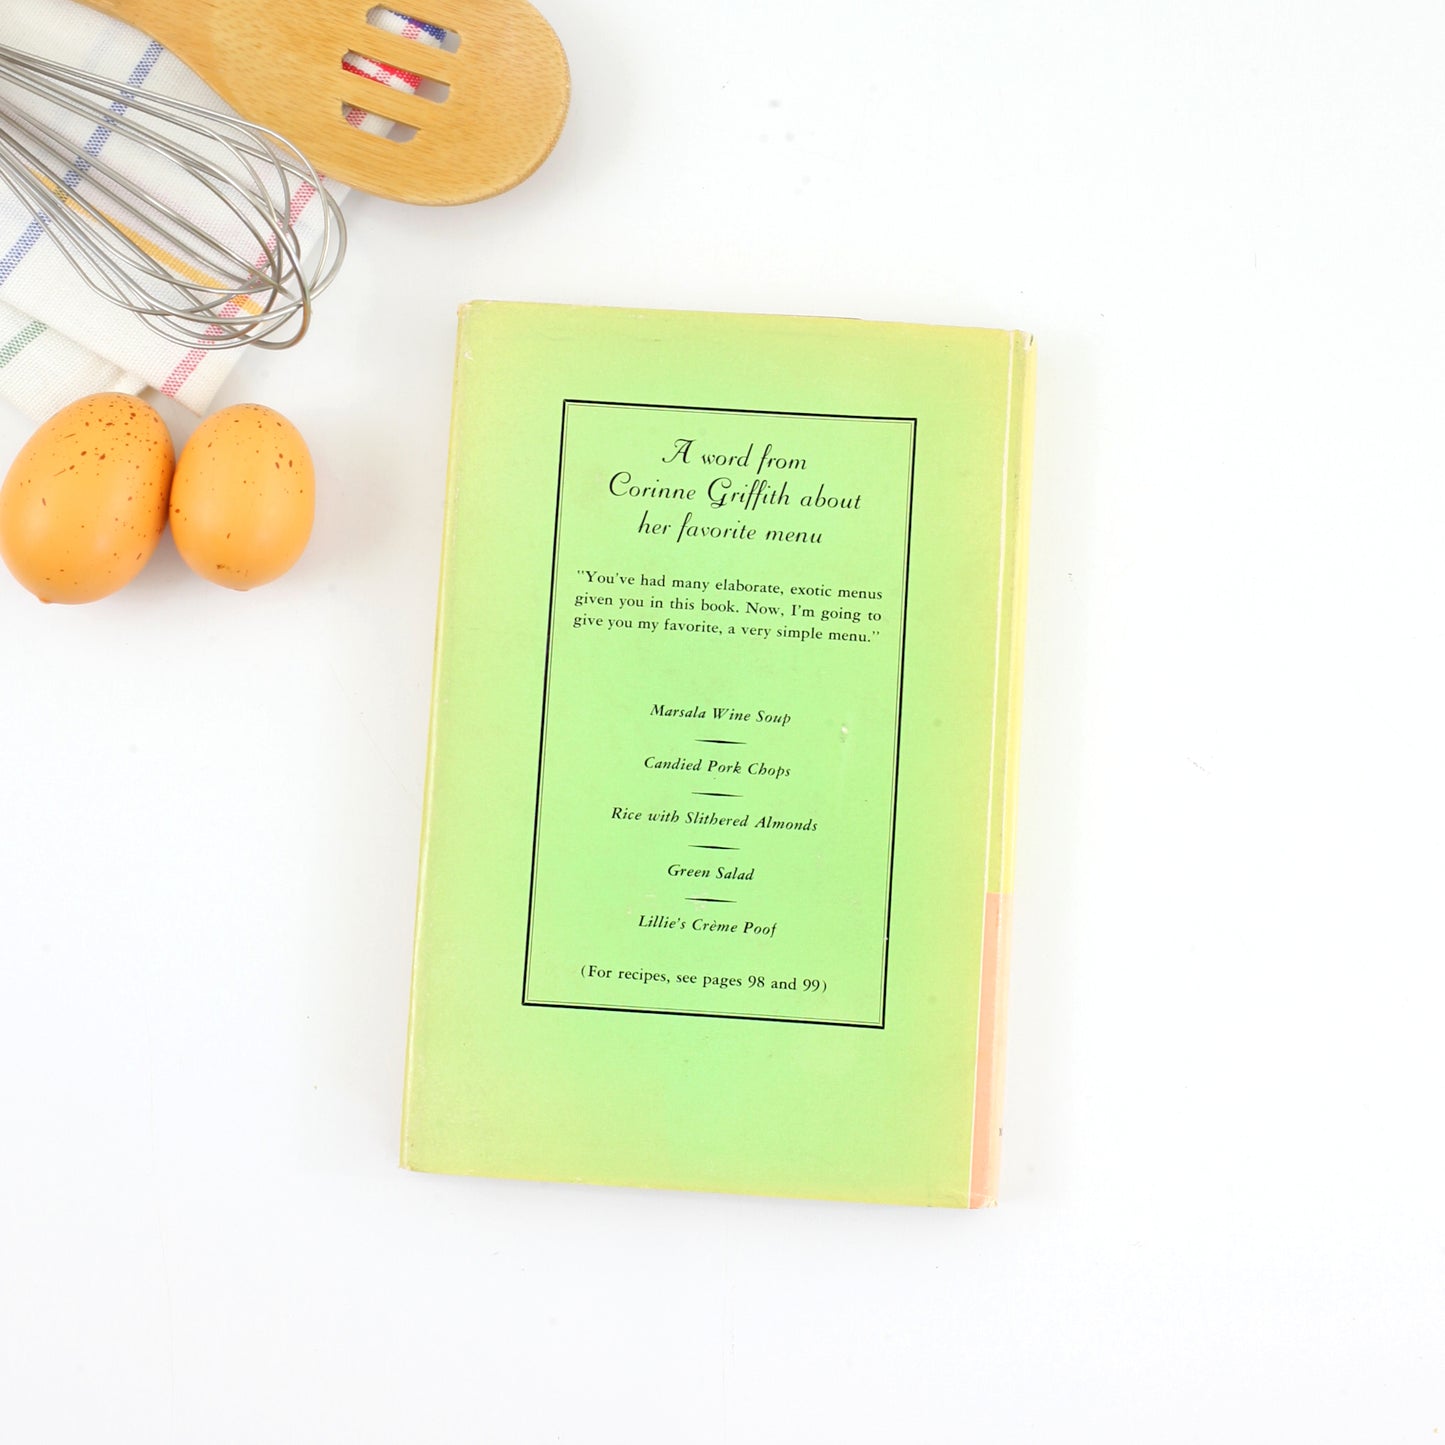 SOLD - I Can't Boil Water: A Cookbook by Corinne Griffith / Vintage 1963 Cookbook *Free US Shipping*